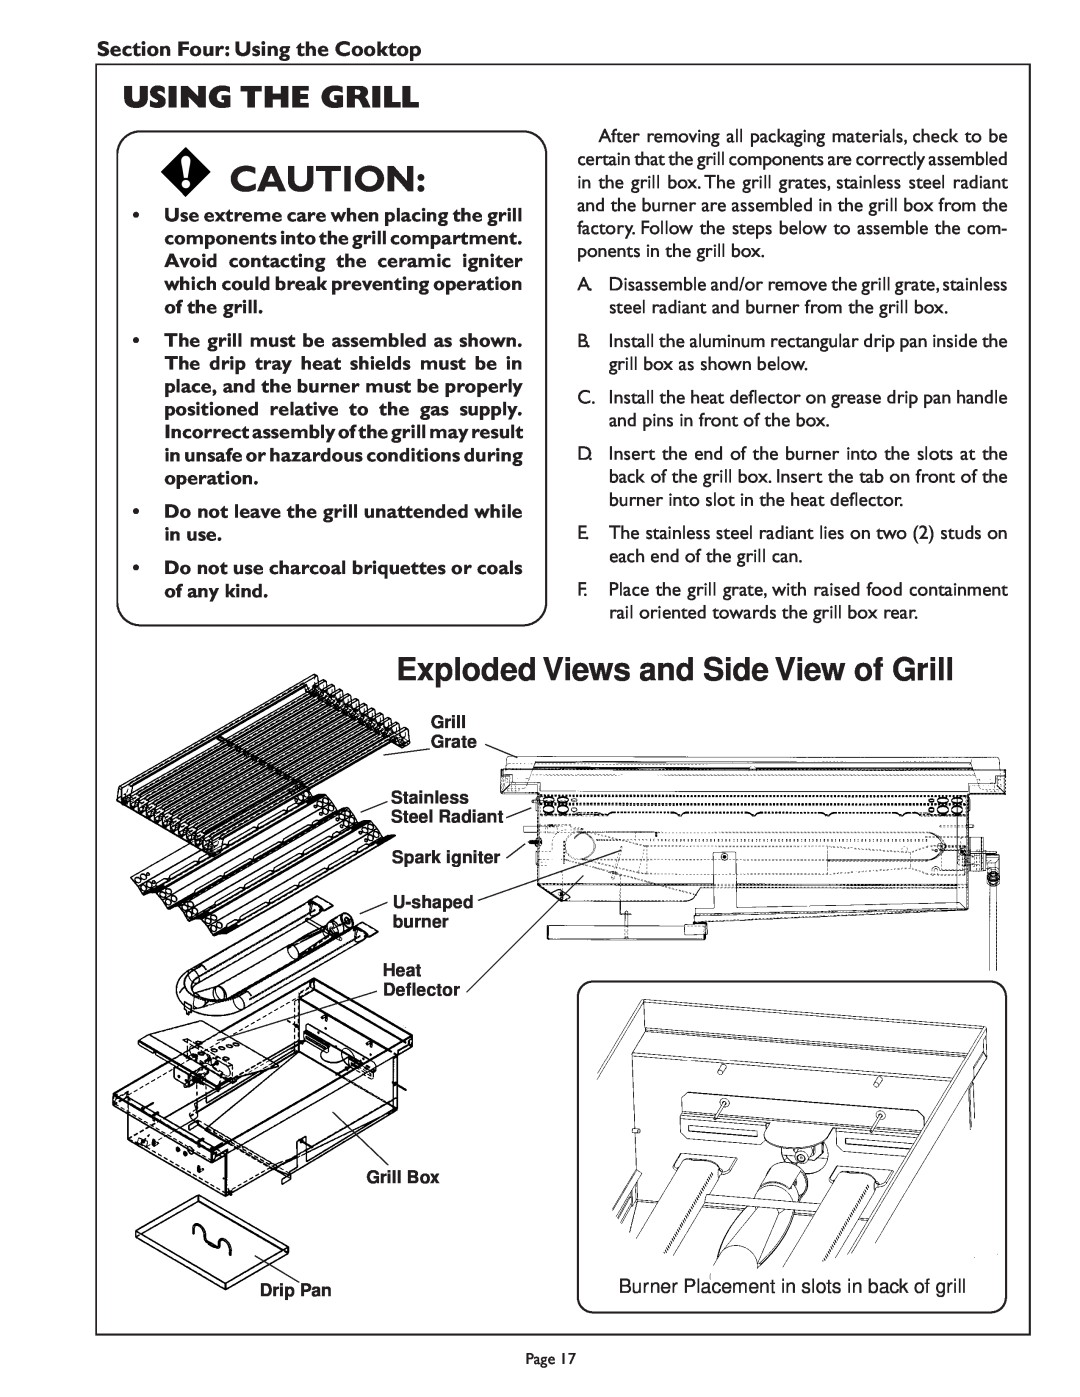 Range Kleen PSC486GD, PSC484GG manual Using The Grill, Exploded Views and Side View of Grill, Section Four Using the Cooktop 